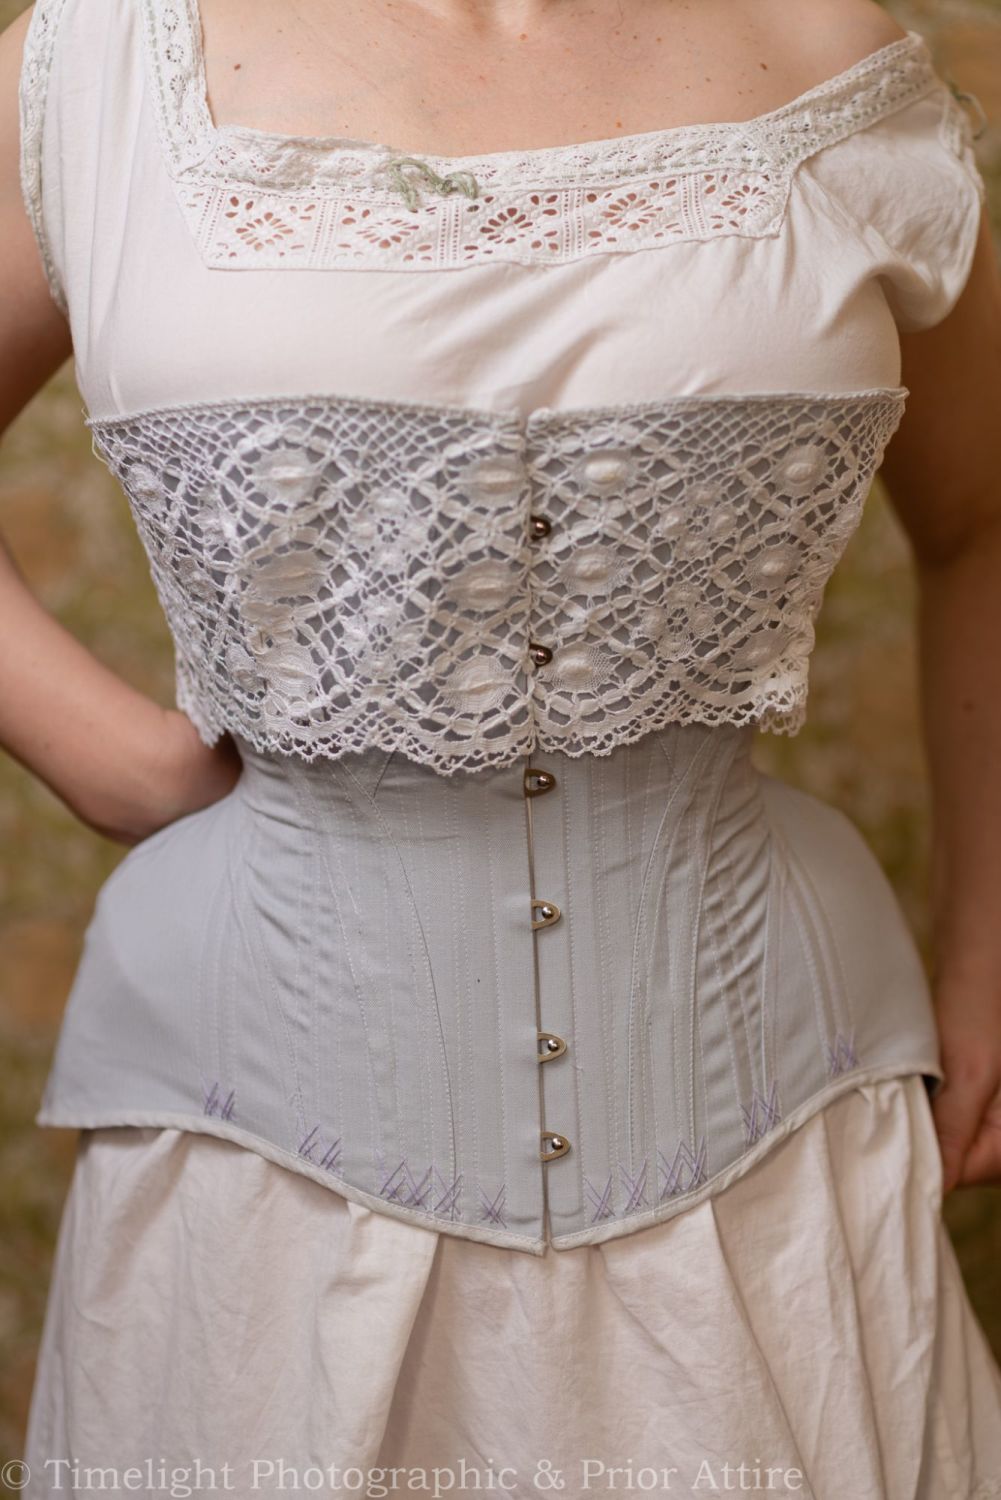 Late Victorian, early Edwardian corset  24.5